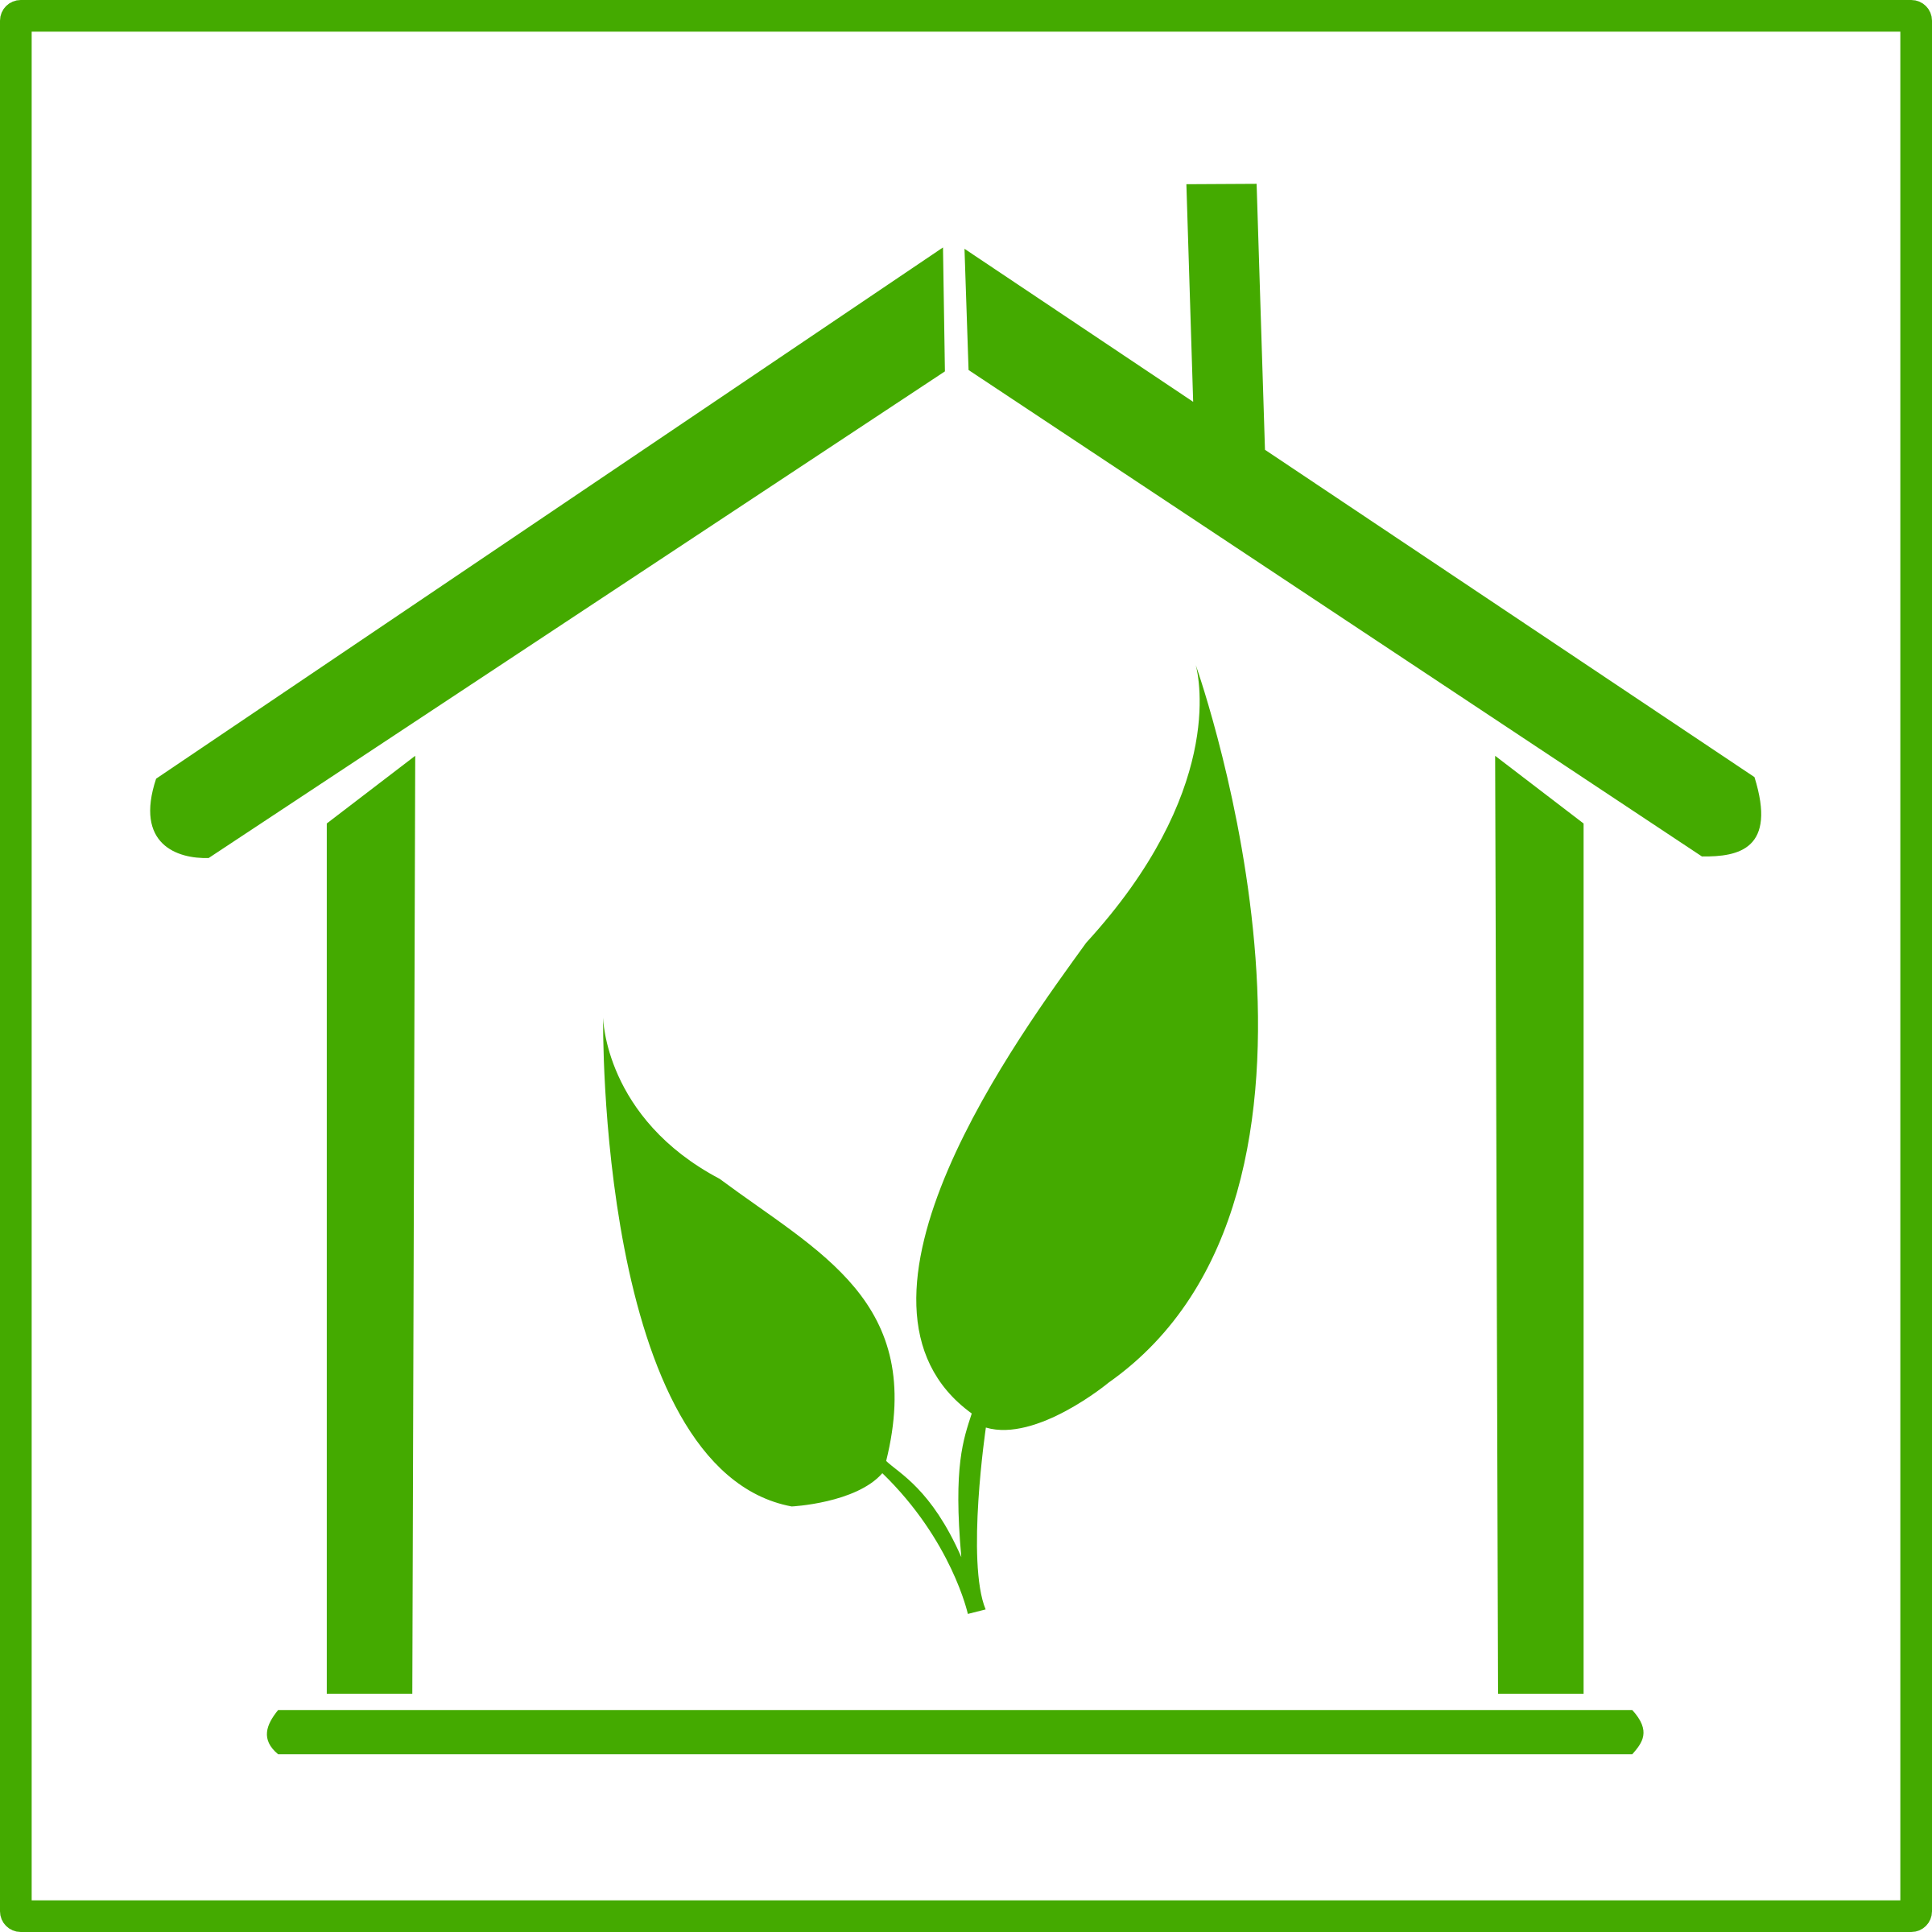 clipart houses green